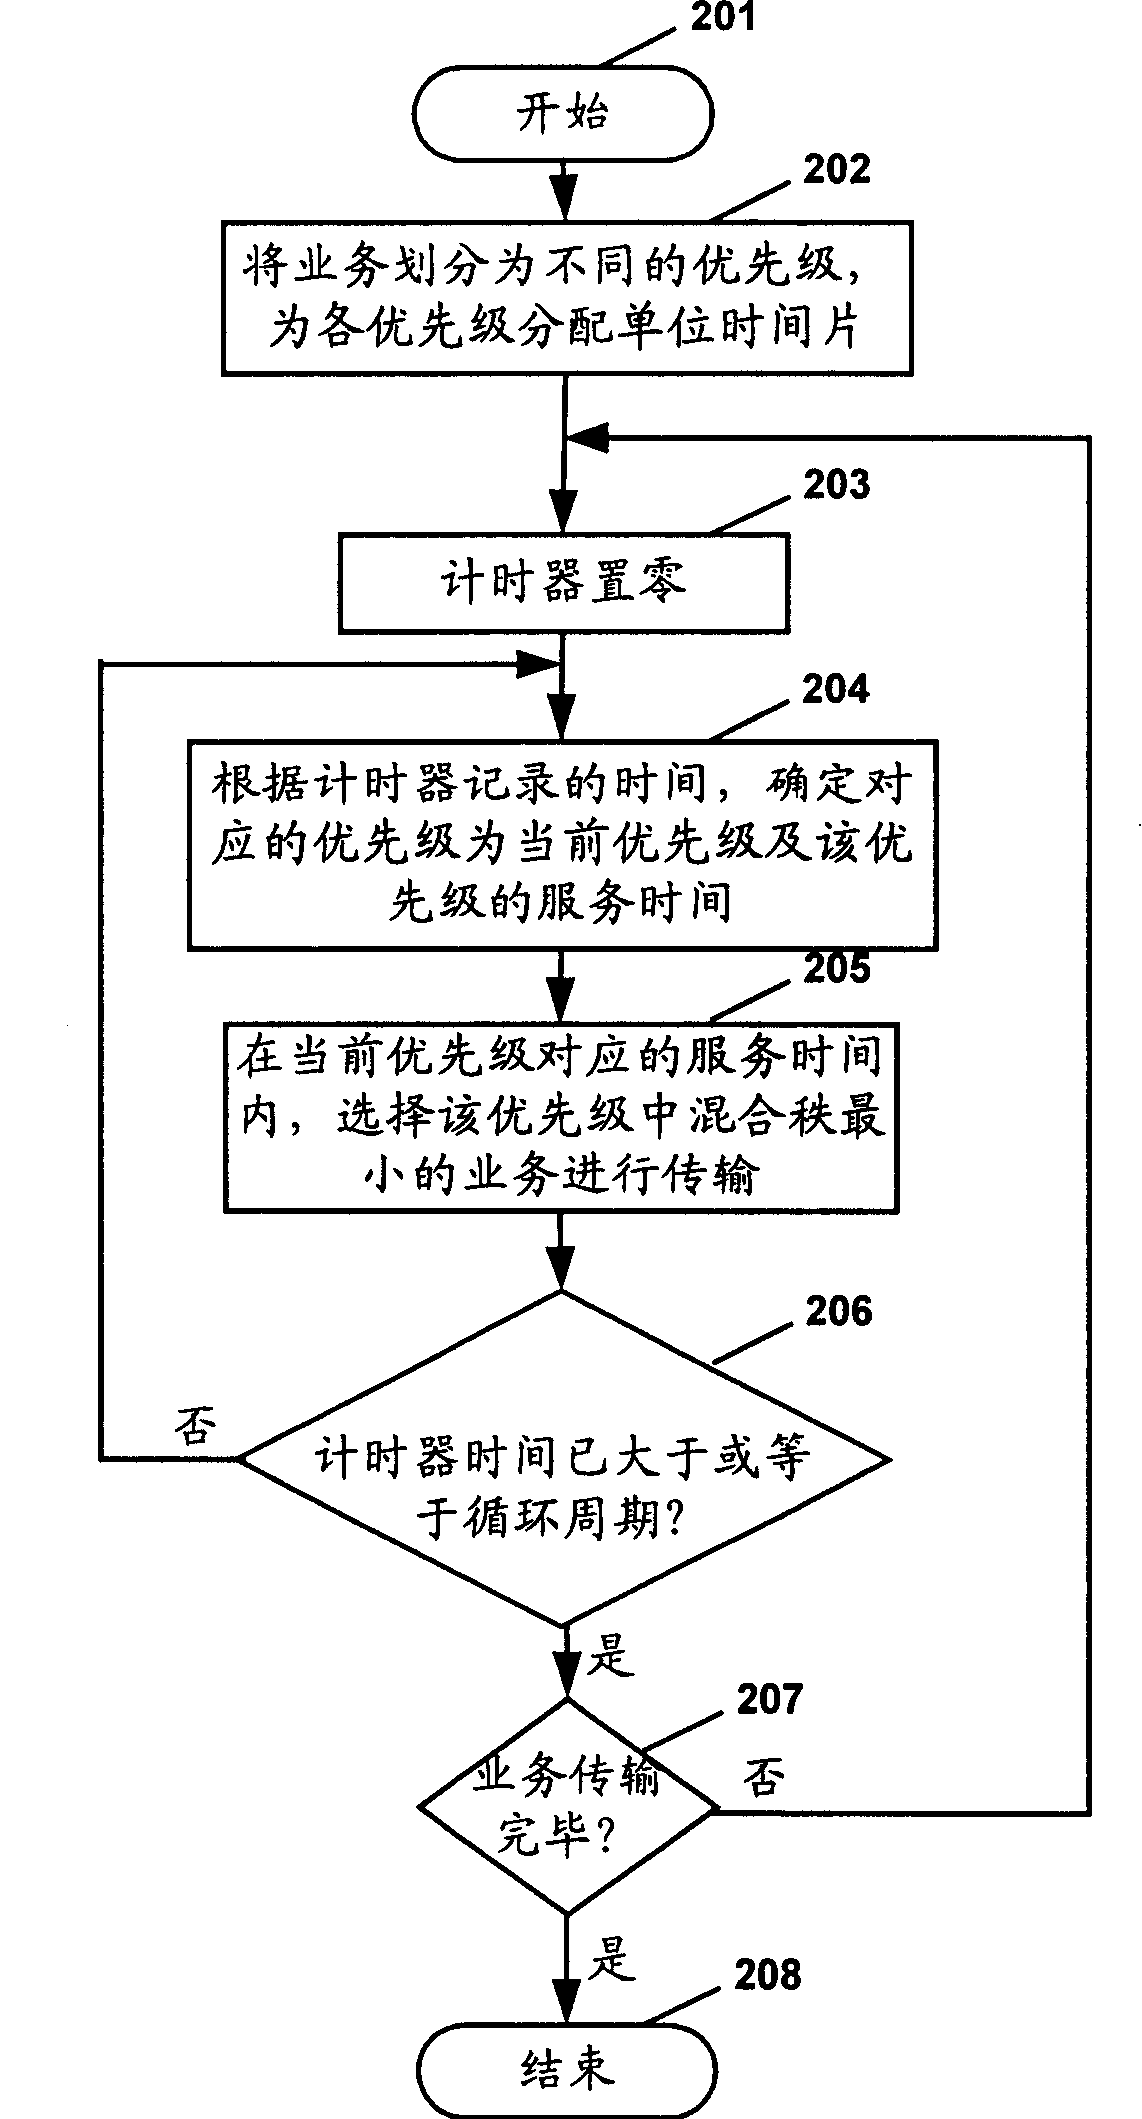 Packet dispatch and flux control method for share transmission channel